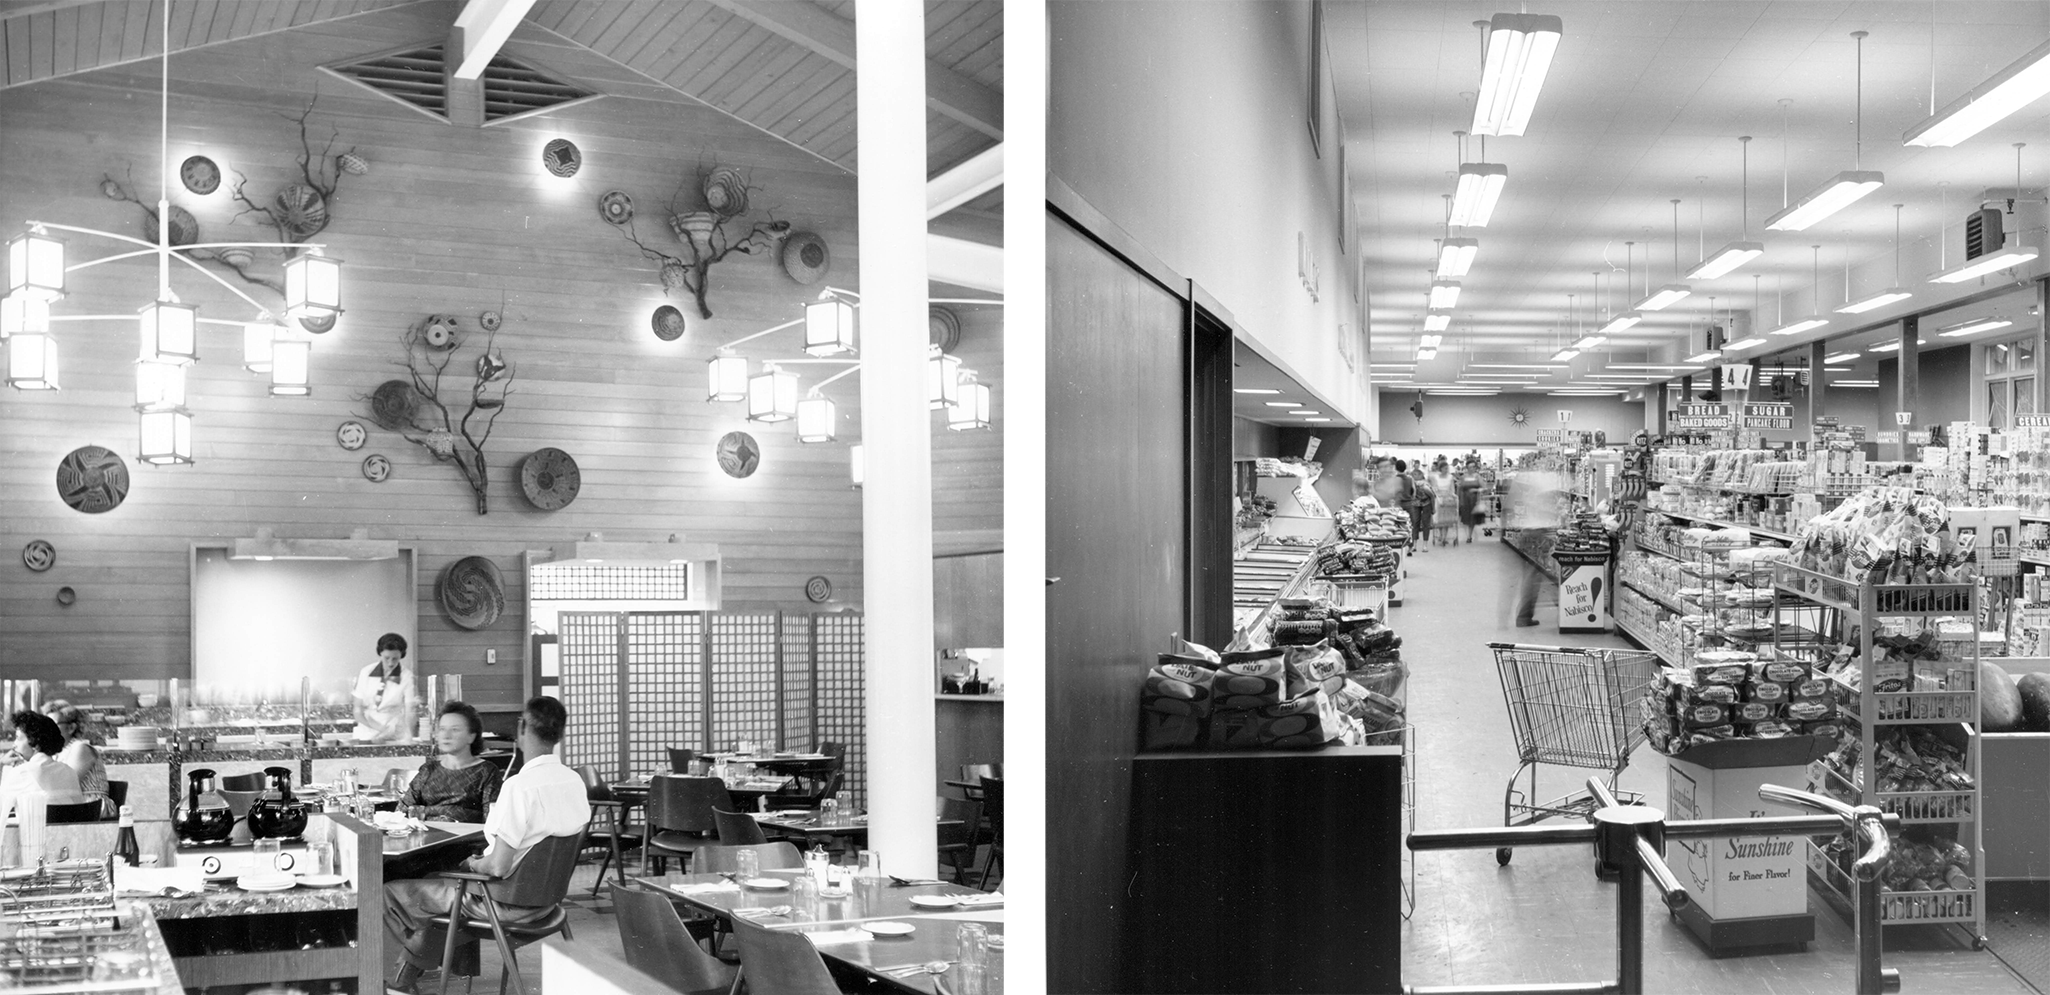 Two images side-by-side showing the interior of a well-stocked grocery store and a high-ceilinged restaurant dining room